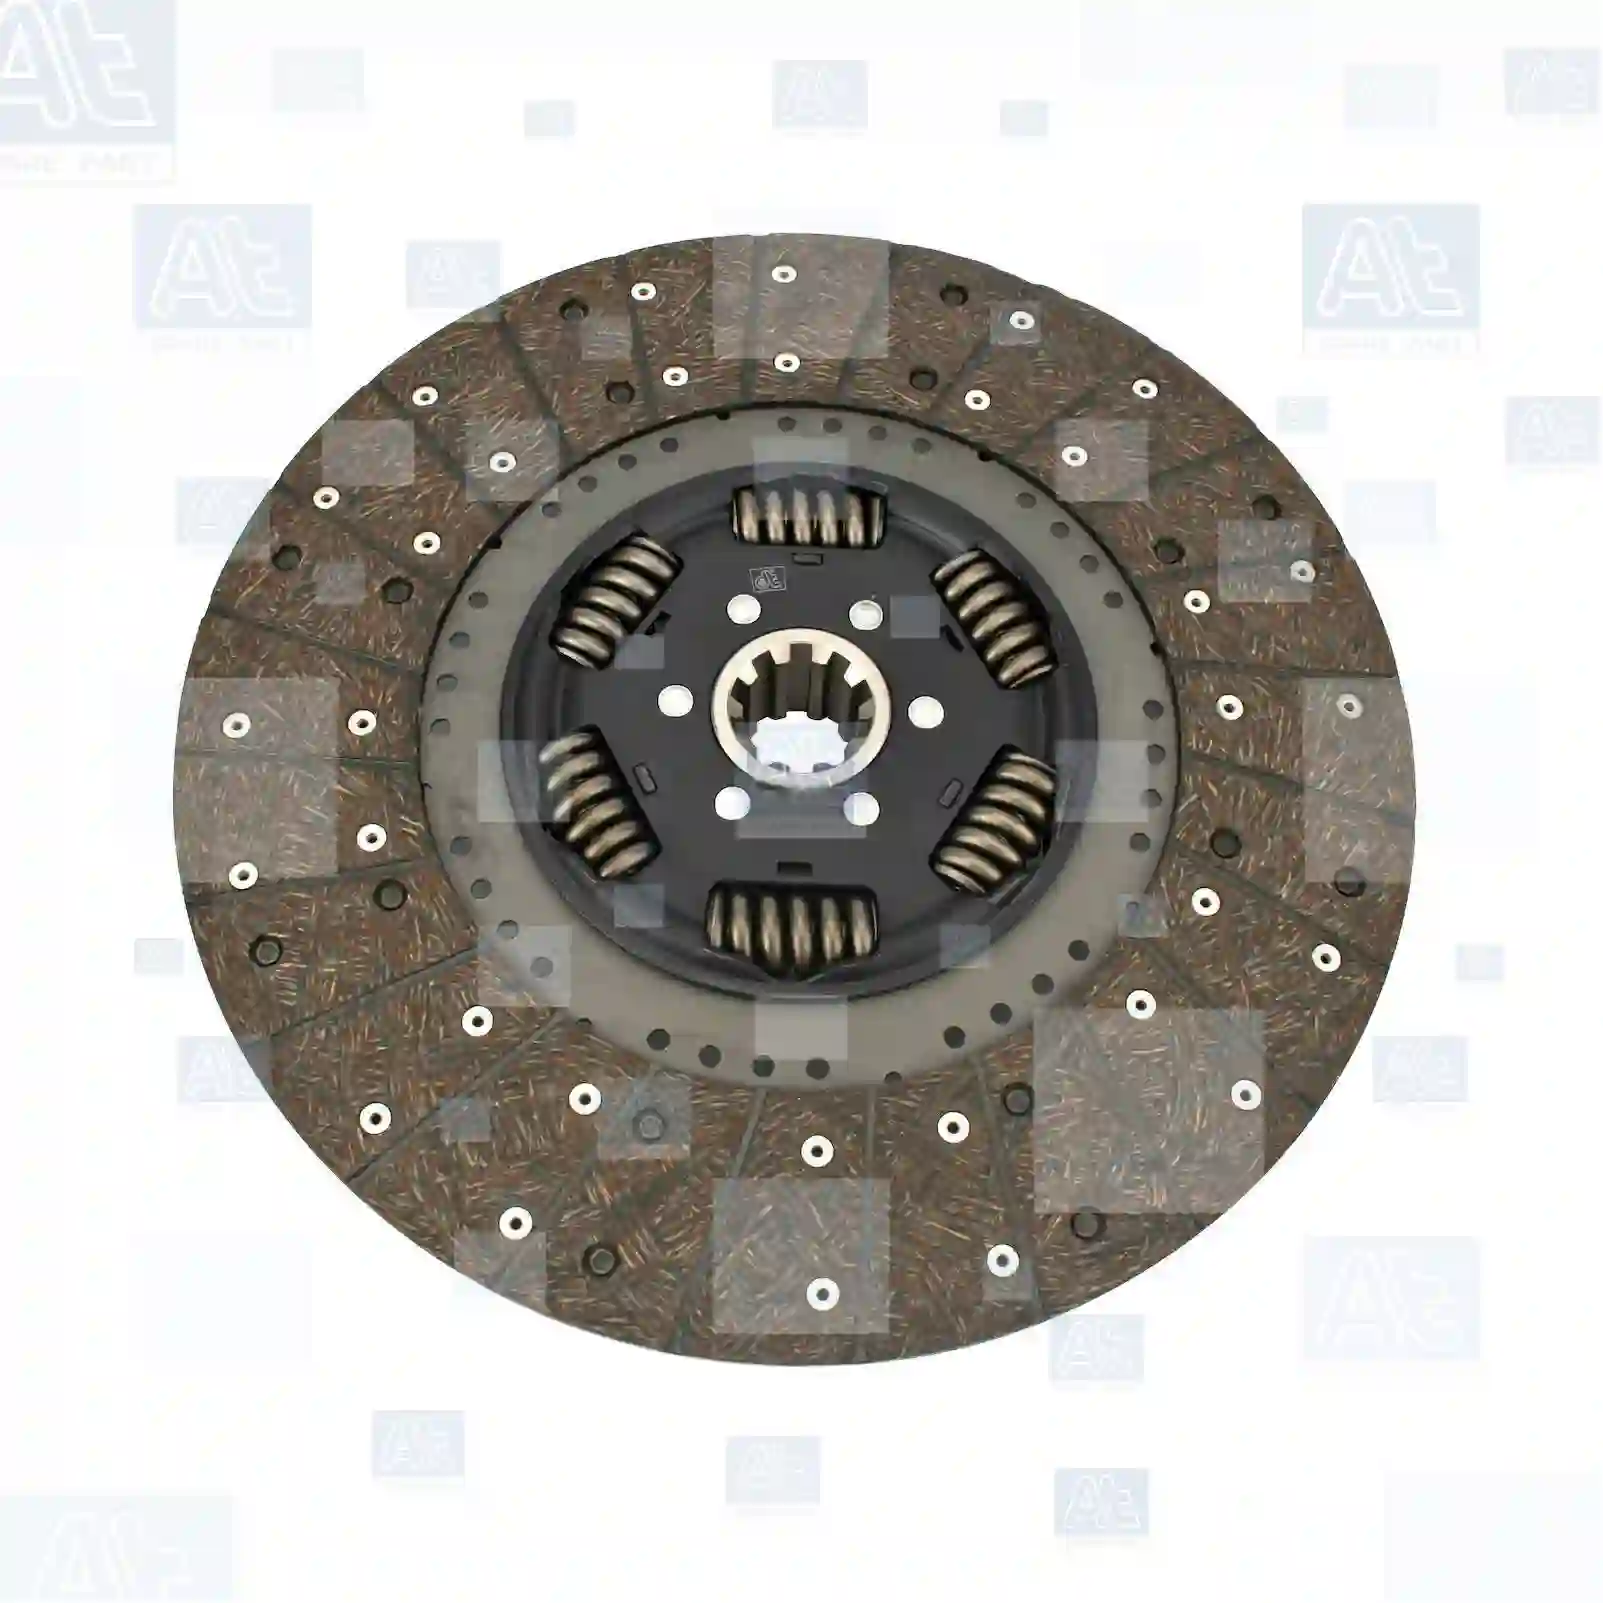 Clutch disc, 77721902, 81303010433, 51303010006, 81303010378, 81303010379, 81303010433, 81303010480, 81303010481, 81303010516, 81303010517, 81303010524, 81303010557, 81303010558, 81303010580, 81303010587, 81303010601, 81303010615, 81303019378, 81303019379, 81303019481, 81303019516, 81303019557, 81303019558, 0011010004, 011010004, 81303010378, 5654556 ||  77721902 At Spare Part | Engine, Accelerator Pedal, Camshaft, Connecting Rod, Crankcase, Crankshaft, Cylinder Head, Engine Suspension Mountings, Exhaust Manifold, Exhaust Gas Recirculation, Filter Kits, Flywheel Housing, General Overhaul Kits, Engine, Intake Manifold, Oil Cleaner, Oil Cooler, Oil Filter, Oil Pump, Oil Sump, Piston & Liner, Sensor & Switch, Timing Case, Turbocharger, Cooling System, Belt Tensioner, Coolant Filter, Coolant Pipe, Corrosion Prevention Agent, Drive, Expansion Tank, Fan, Intercooler, Monitors & Gauges, Radiator, Thermostat, V-Belt / Timing belt, Water Pump, Fuel System, Electronical Injector Unit, Feed Pump, Fuel Filter, cpl., Fuel Gauge Sender,  Fuel Line, Fuel Pump, Fuel Tank, Injection Line Kit, Injection Pump, Exhaust System, Clutch & Pedal, Gearbox, Propeller Shaft, Axles, Brake System, Hubs & Wheels, Suspension, Leaf Spring, Universal Parts / Accessories, Steering, Electrical System, Cabin Clutch disc, 77721902, 81303010433, 51303010006, 81303010378, 81303010379, 81303010433, 81303010480, 81303010481, 81303010516, 81303010517, 81303010524, 81303010557, 81303010558, 81303010580, 81303010587, 81303010601, 81303010615, 81303019378, 81303019379, 81303019481, 81303019516, 81303019557, 81303019558, 0011010004, 011010004, 81303010378, 5654556 ||  77721902 At Spare Part | Engine, Accelerator Pedal, Camshaft, Connecting Rod, Crankcase, Crankshaft, Cylinder Head, Engine Suspension Mountings, Exhaust Manifold, Exhaust Gas Recirculation, Filter Kits, Flywheel Housing, General Overhaul Kits, Engine, Intake Manifold, Oil Cleaner, Oil Cooler, Oil Filter, Oil Pump, Oil Sump, Piston & Liner, Sensor & Switch, Timing Case, Turbocharger, Cooling System, Belt Tensioner, Coolant Filter, Coolant Pipe, Corrosion Prevention Agent, Drive, Expansion Tank, Fan, Intercooler, Monitors & Gauges, Radiator, Thermostat, V-Belt / Timing belt, Water Pump, Fuel System, Electronical Injector Unit, Feed Pump, Fuel Filter, cpl., Fuel Gauge Sender,  Fuel Line, Fuel Pump, Fuel Tank, Injection Line Kit, Injection Pump, Exhaust System, Clutch & Pedal, Gearbox, Propeller Shaft, Axles, Brake System, Hubs & Wheels, Suspension, Leaf Spring, Universal Parts / Accessories, Steering, Electrical System, Cabin